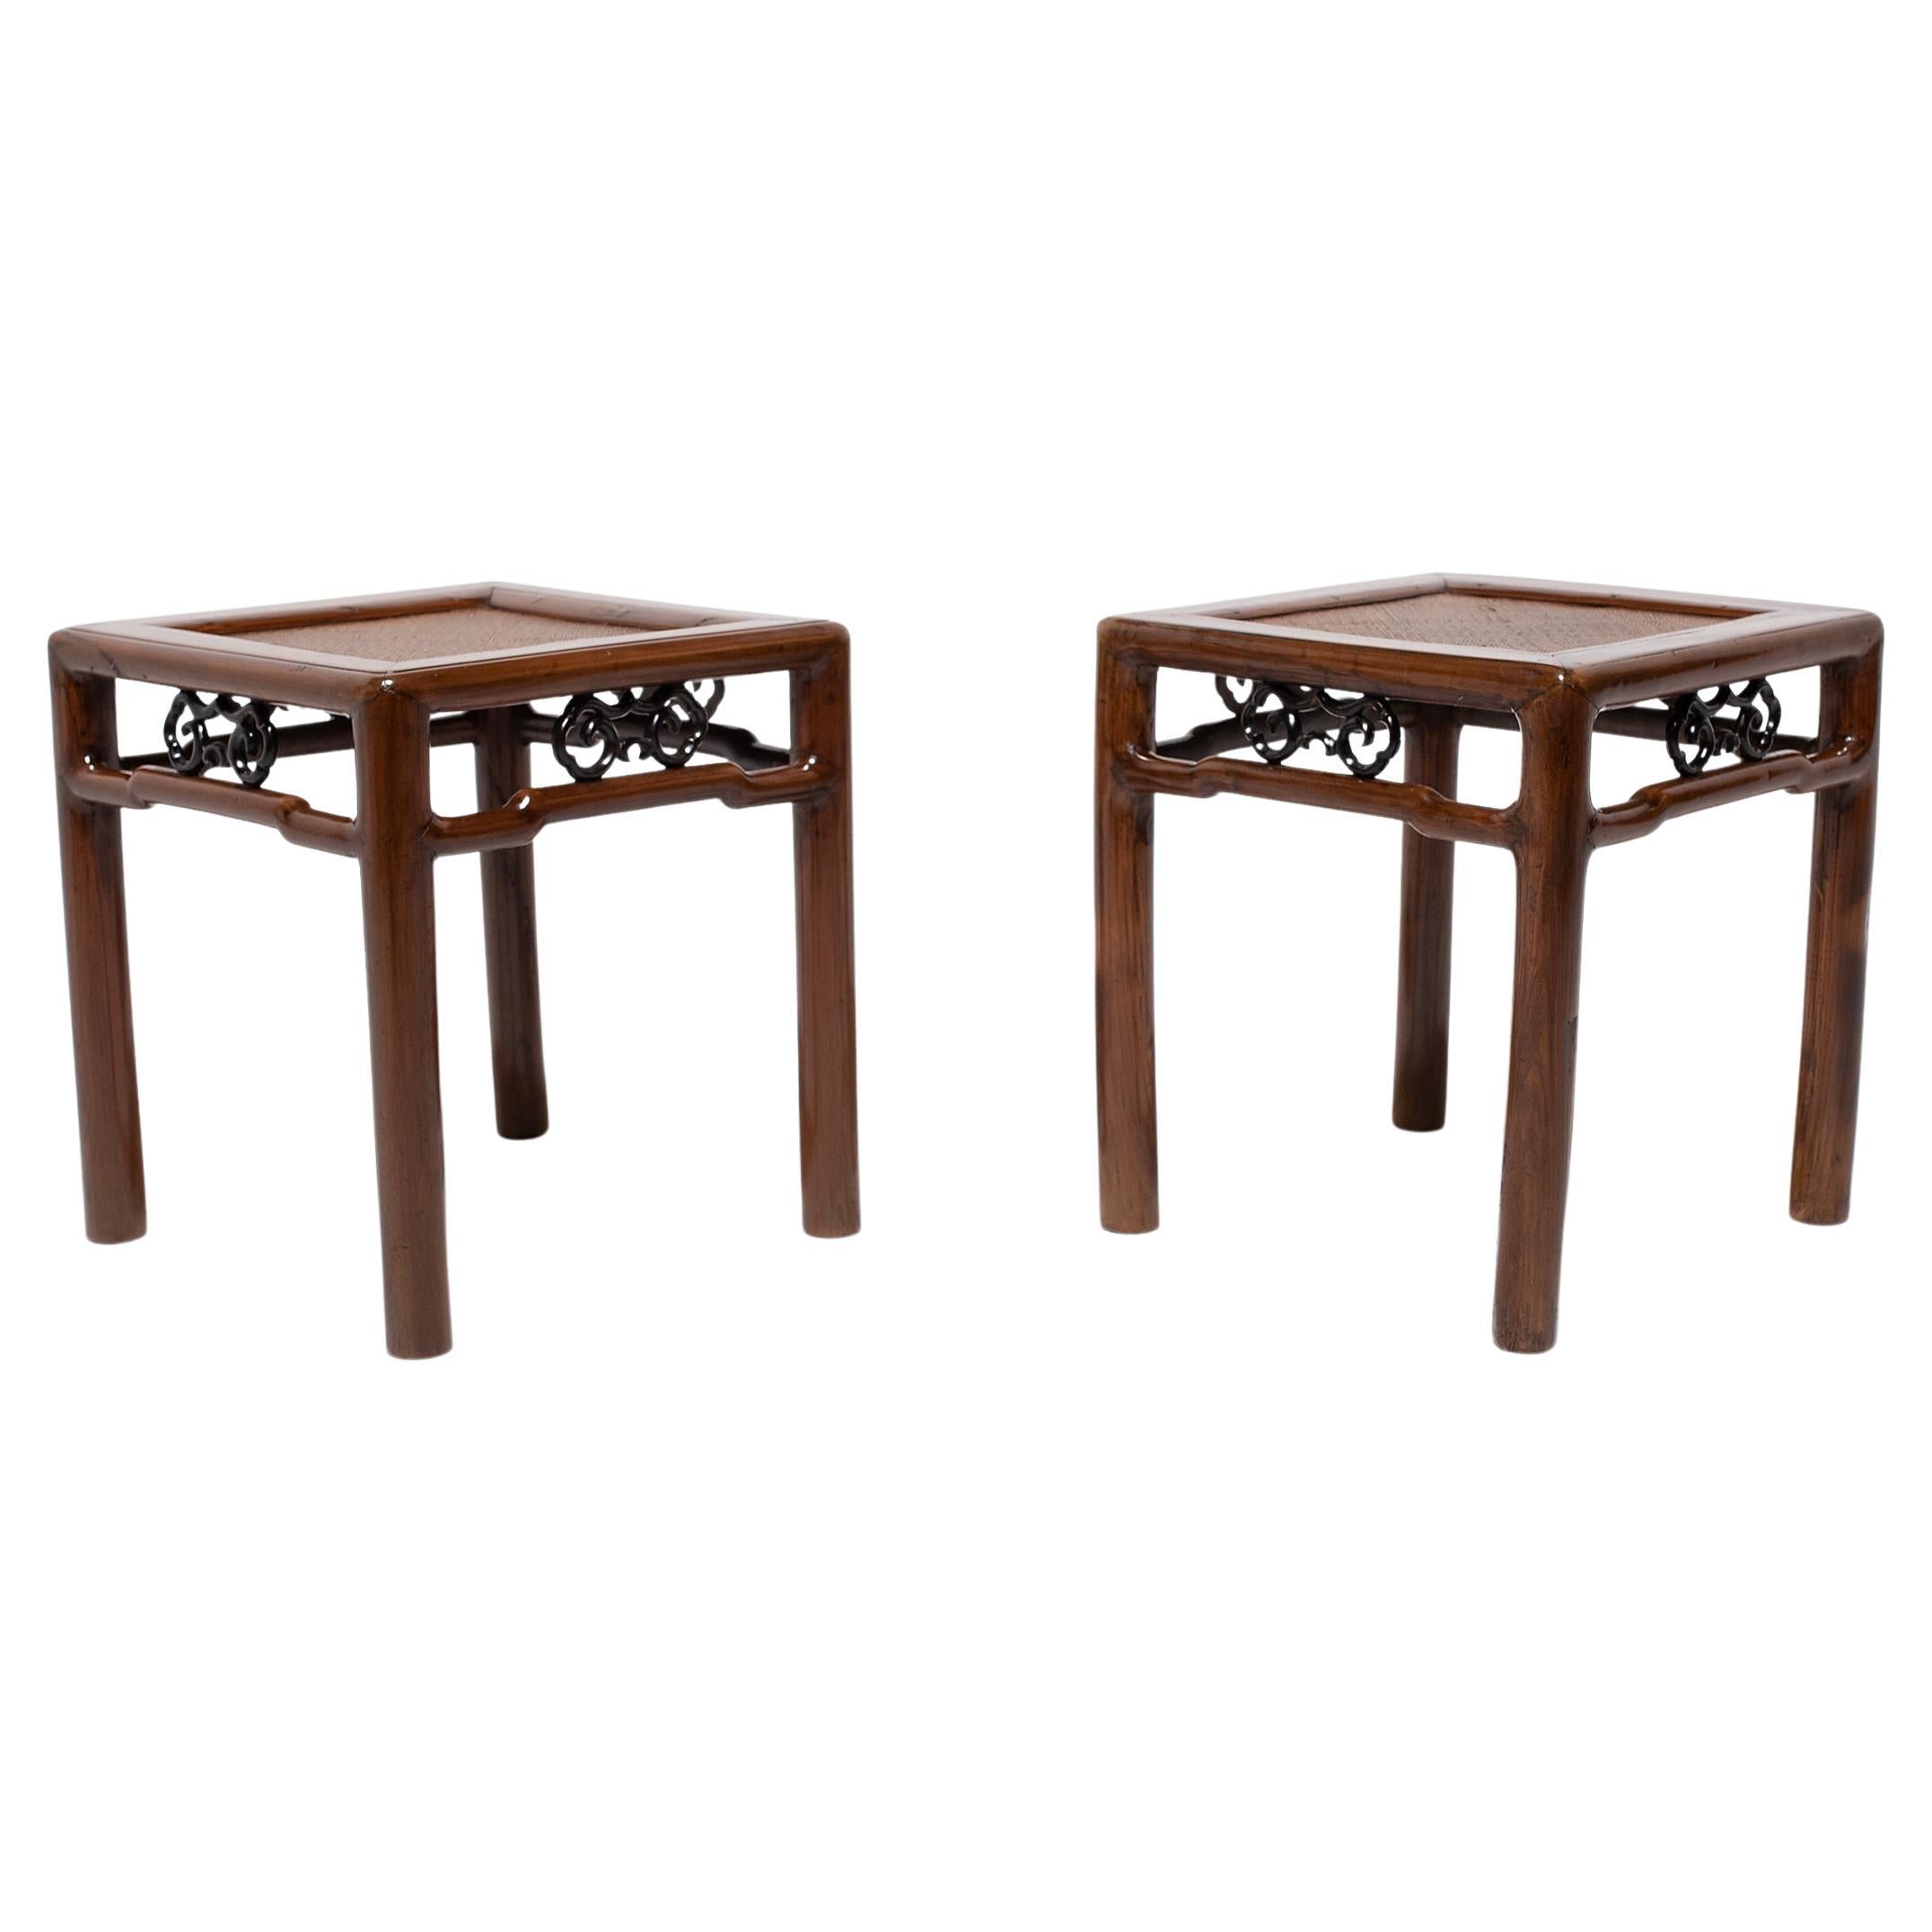 Pair of Chinese Woven Top Square Stools, c. 1850 For Sale